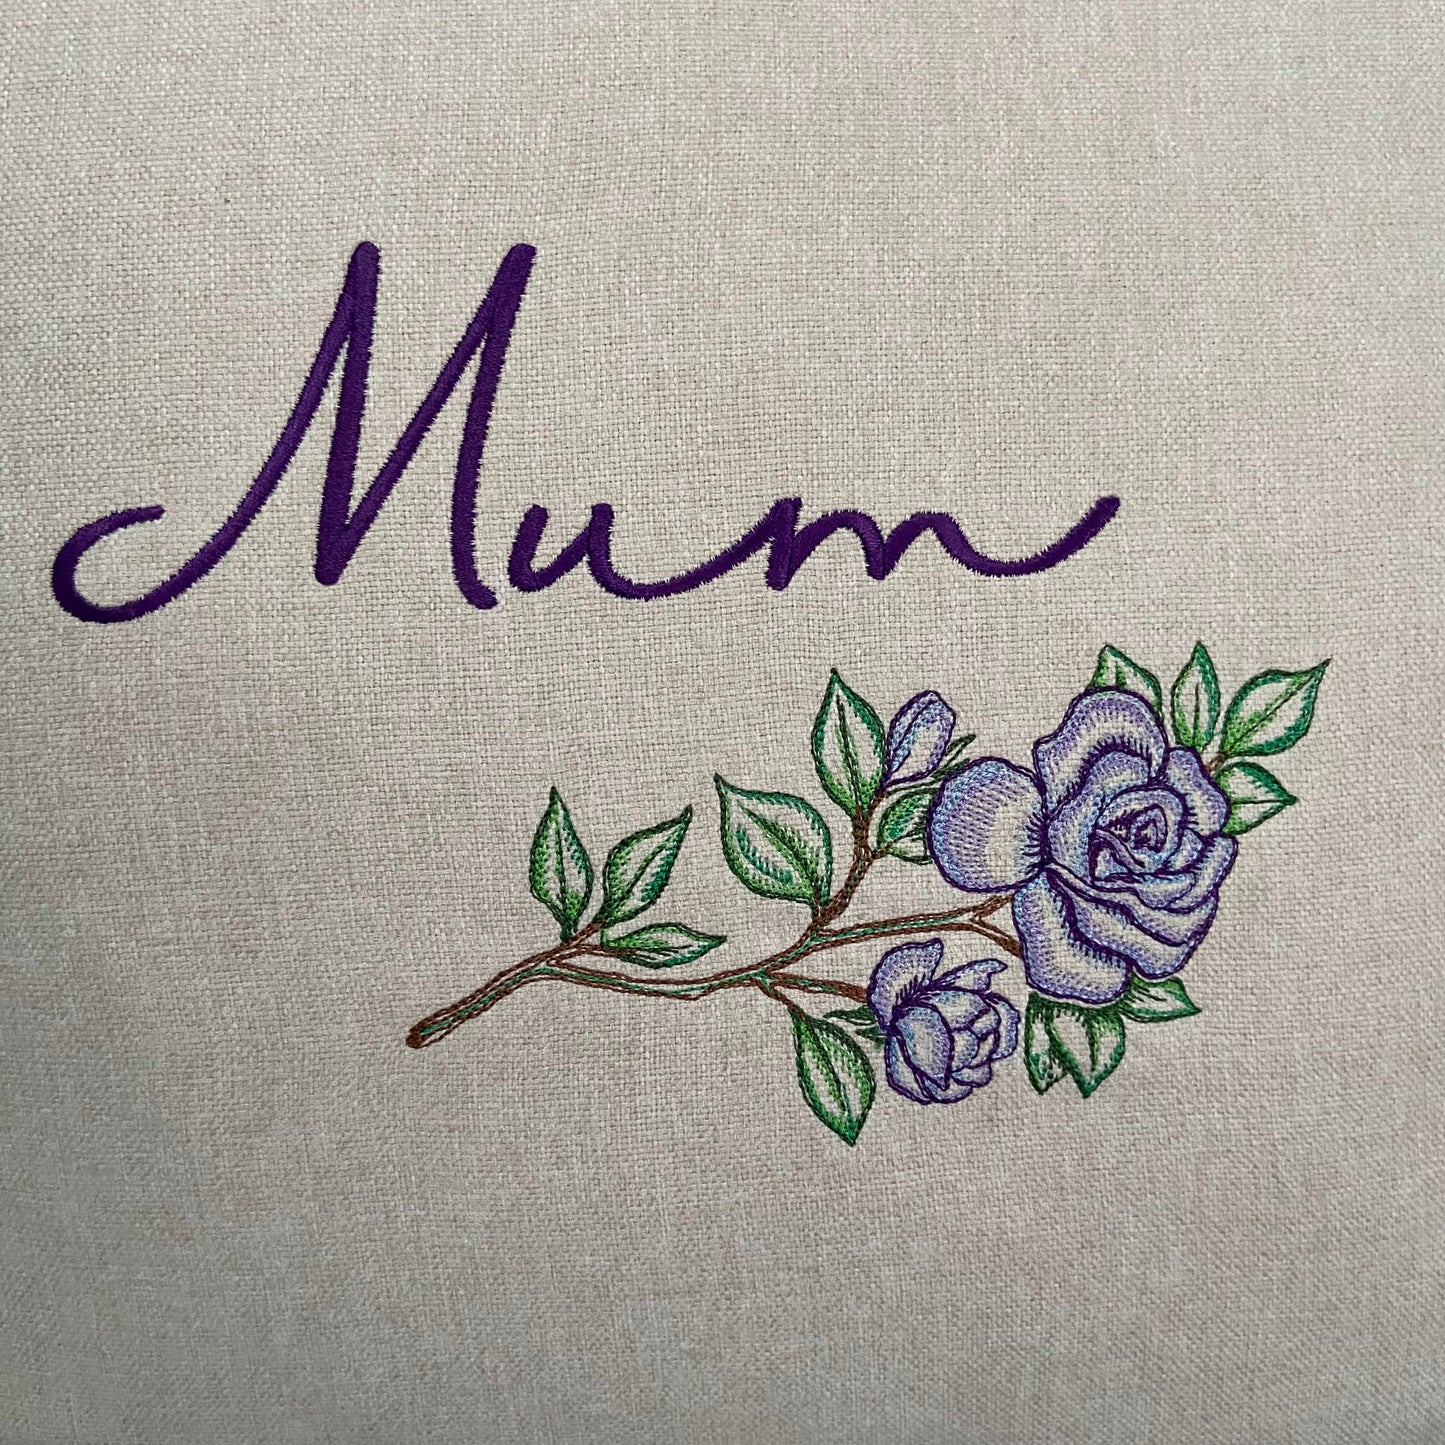 Mum or Nan with Roses Embroidered Cushion Cover - 45cm x 45cm